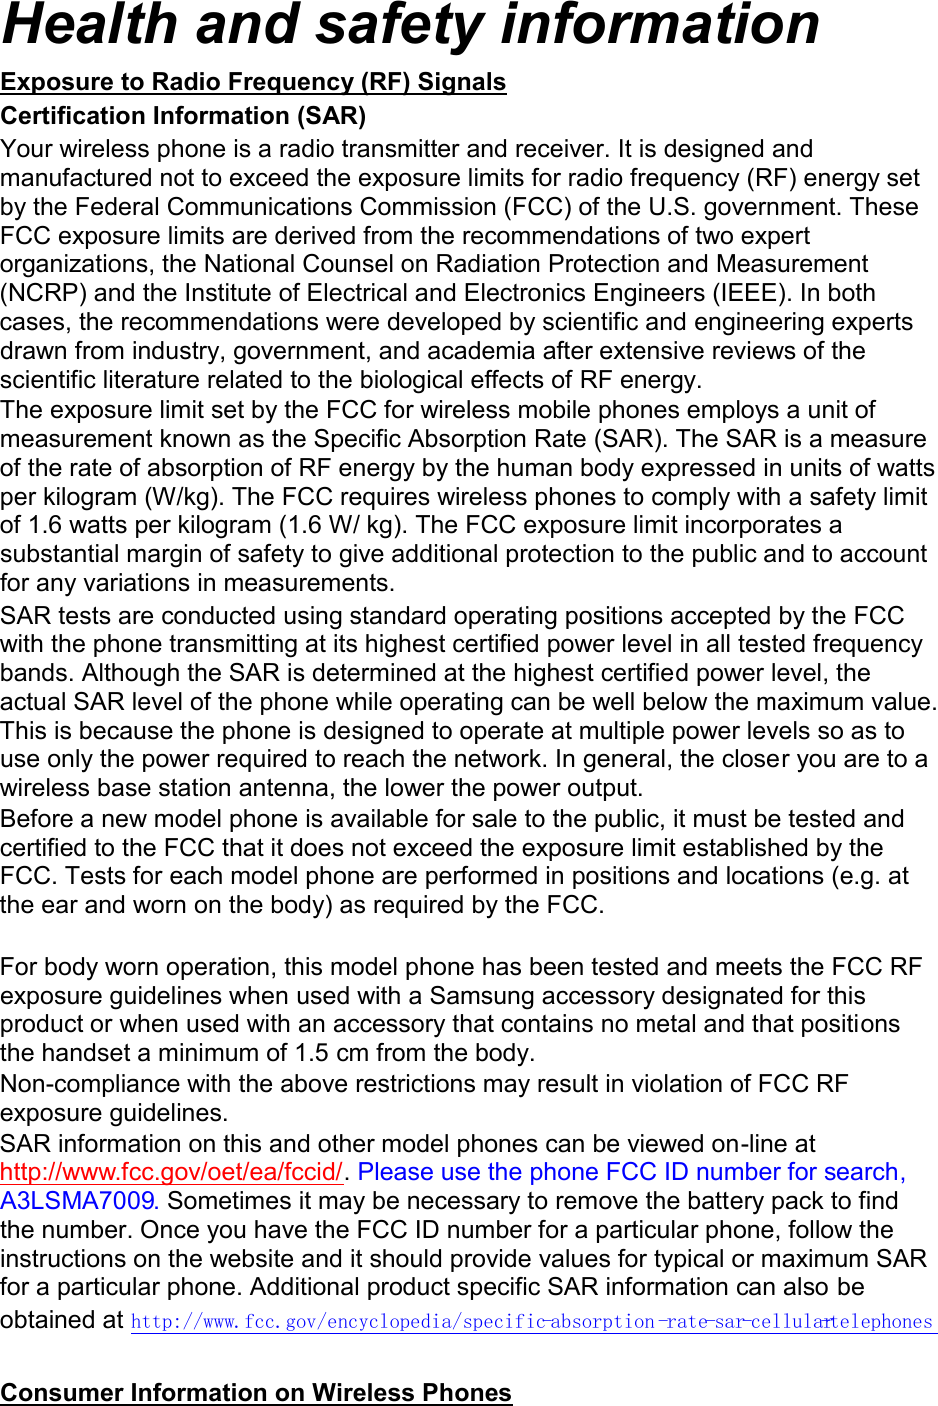 Health and safety information Exposure to Radio Frequency (RF) Signals Certification Information (SAR) Your wireless phone is a radio transmitter and receiver. It is designed and manufactured not to exceed the exposure limits for radio frequency (RF) energy set by the Federal Communications Commission (FCC) of the U.S. government. These FCC exposure limits are derived from the recommendations of two expert organizations, the National Counsel on Radiation Protection and Measurement (NCRP) and the Institute of Electrical and Electronics Engineers (IEEE). In both cases, the recommendations were developed by scientific and engineering experts drawn from industry, government, and academia after extensive reviews of the scientific literature related to the biological effects of RF energy. The exposure limit set by the FCC for wireless mobile phones employs a unit of measurement known as the Specific Absorption Rate (SAR). The SAR is a measure of the rate of absorption of RF energy by the human body expressed in units of watts per kilogram (W/kg). The FCC requires wireless phones to comply with a safety limit of 1.6 watts per kilogram (1.6 W/ kg). The FCC exposure limit incorporates a substantial margin of safety to give additional protection to the public and to account for any variations in measurements. SAR tests are conducted using standard operating positions accepted by the FCC with the phone transmitting at its highest certified power level in all tested frequency bands. Although the SAR is determined at the highest certified power level, the actual SAR level of the phone while operating can be well below the maximum value. This is because the phone is designed to operate at multiple power levels so as to use only the power required to reach the network. In general, the closer you are to a wireless base station antenna, the lower the power output. Before a new model phone is available for sale to the public, it must be tested and certified to the FCC that it does not exceed the exposure limit established by the FCC. Tests for each model phone are performed in positions and locations (e.g. at the ear and worn on the body) as required by the FCC.      For body worn operation, this model phone has been tested and meets the FCC RF exposure guidelines when used with a Samsung accessory designated for this product or when used with an accessory that contains no metal and that positions the handset a minimum of 1.5 cm from the body.   Non-compliance with the above restrictions may result in violation of FCC RF exposure guidelines. SAR information on this and other model phones can be viewed on-line at http://www.fcc.gov/oet/ea/fccid/. Please use the phone FCC ID number for search, A3LSMA7009. Sometimes it may be necessary to remove the battery pack to find the number. Once you have the FCC ID number for a particular phone, follow the instructions on the website and it should provide values for typical or maximum SAR for a particular phone. Additional product specific SAR information can also be obtained at http://www.fcc.gov/encyclopedia/specific-absorption -rate-sar-cellular-telephones   Consumer Information on Wireless Phones 